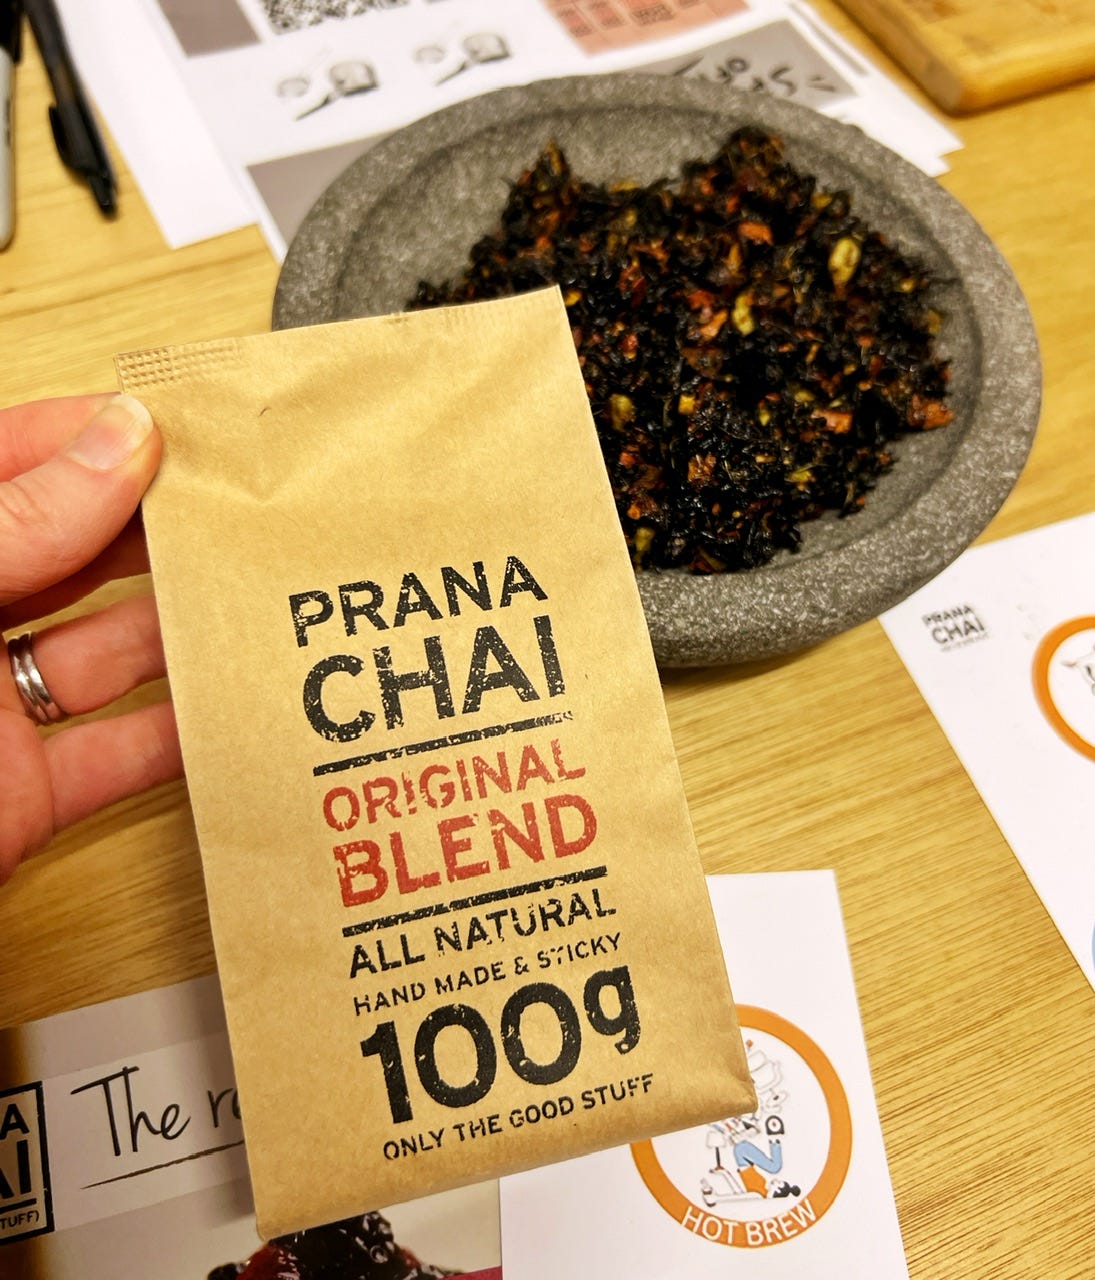 Prana Chai packaging and loose leaf tea and spice mix